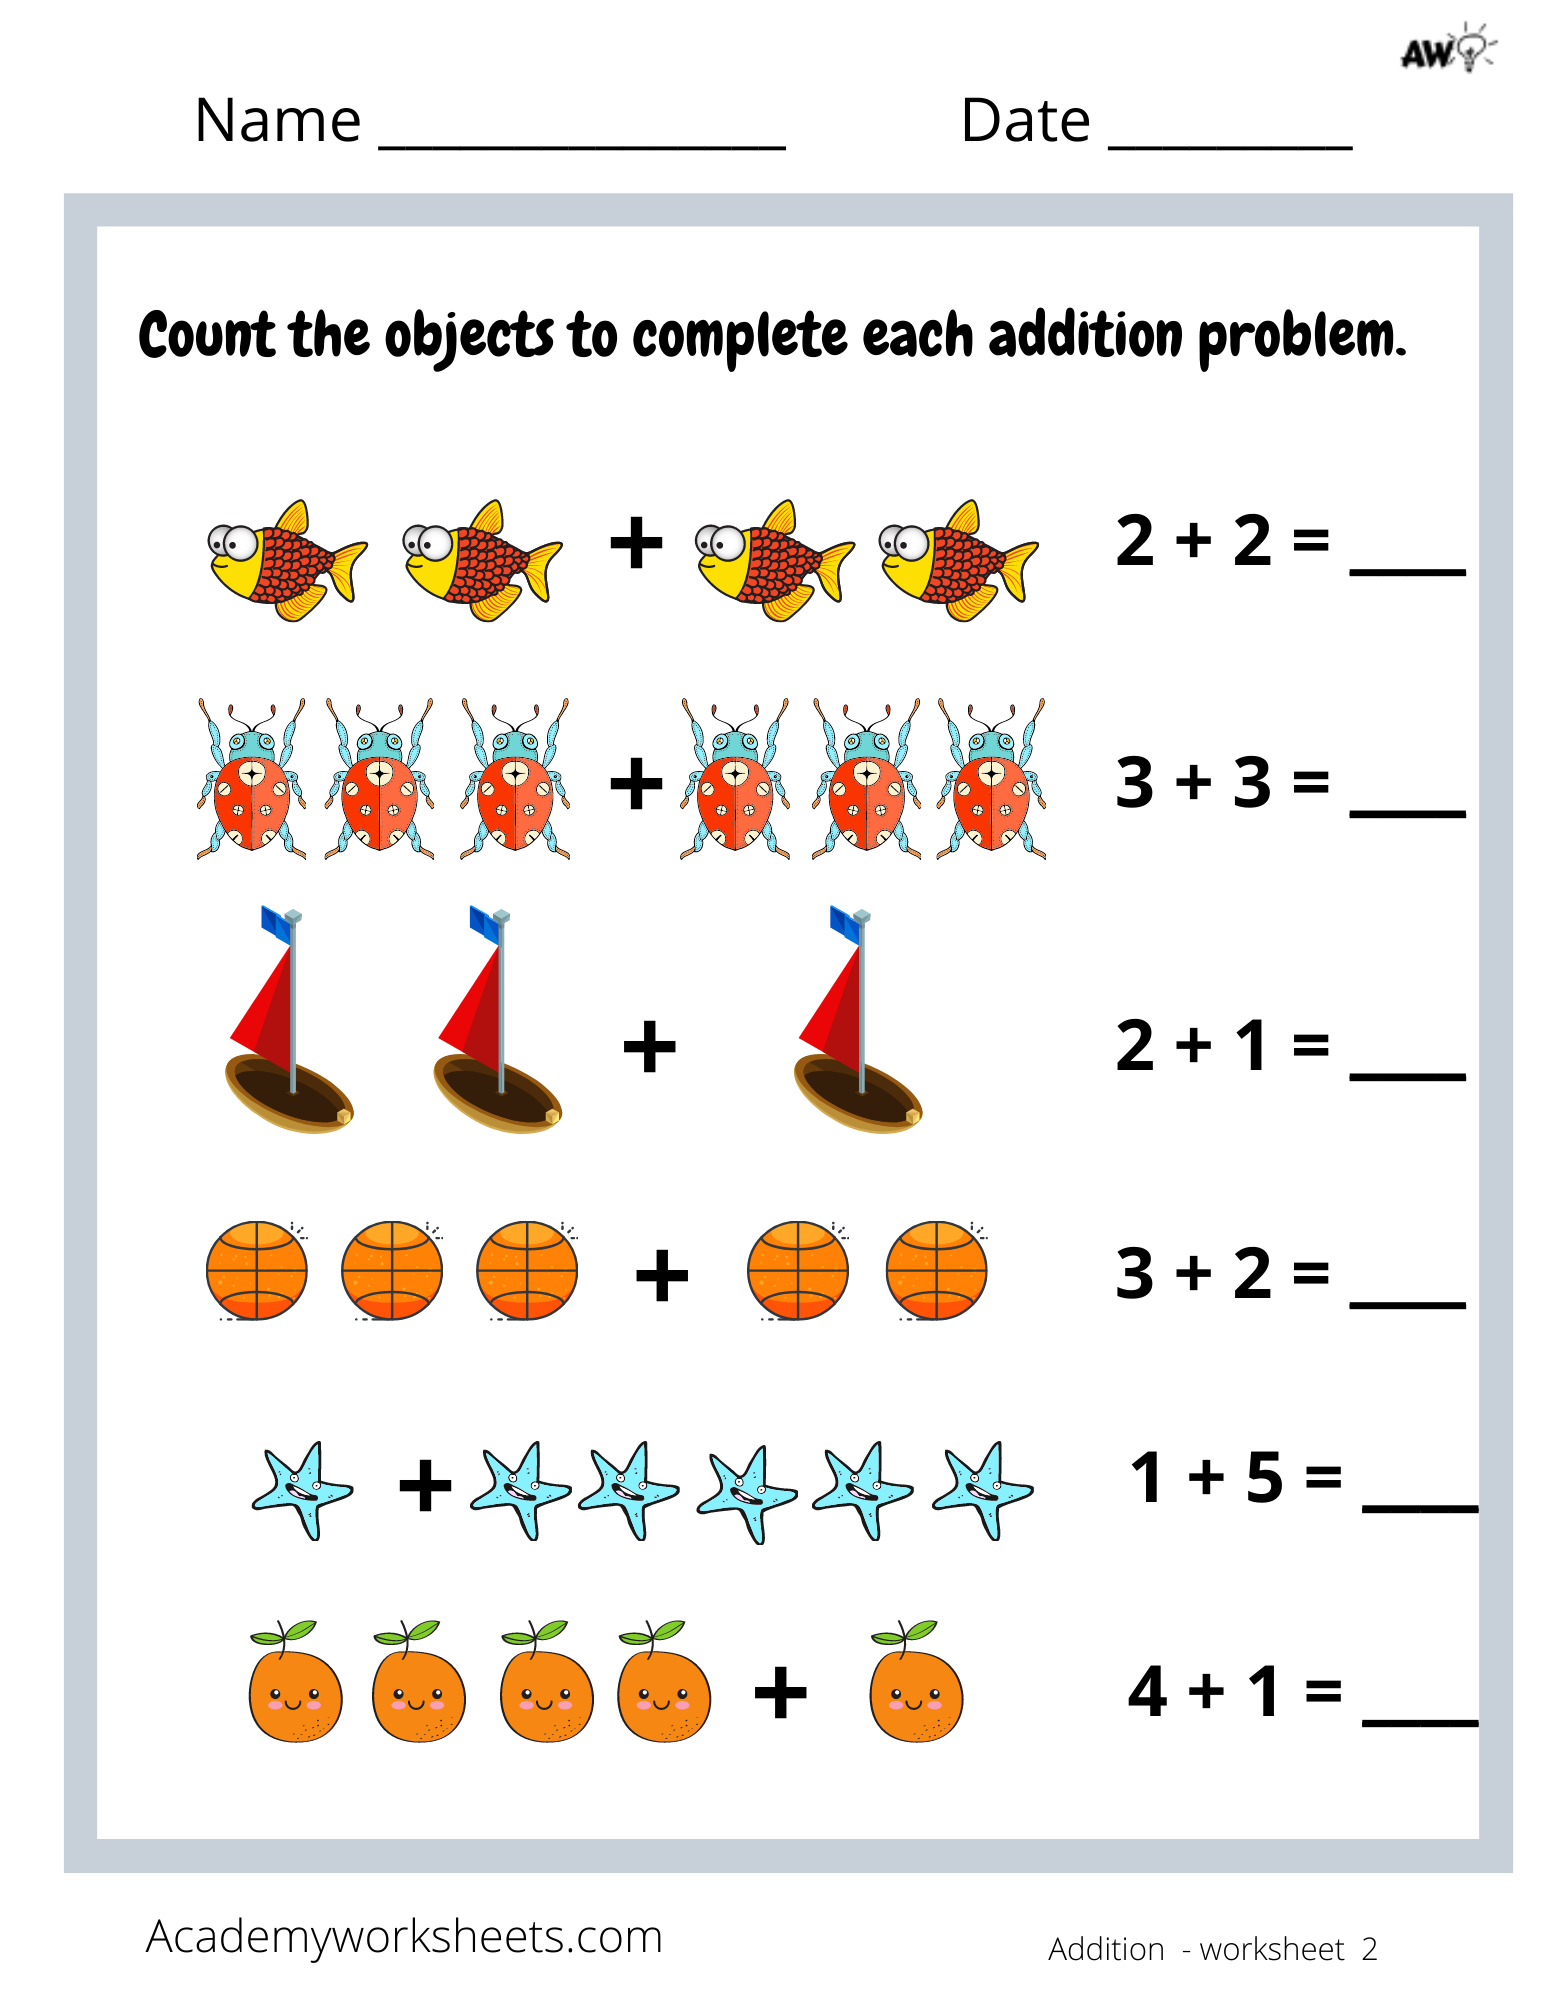 Picture Addition Sums To 5 Academy Worksheets